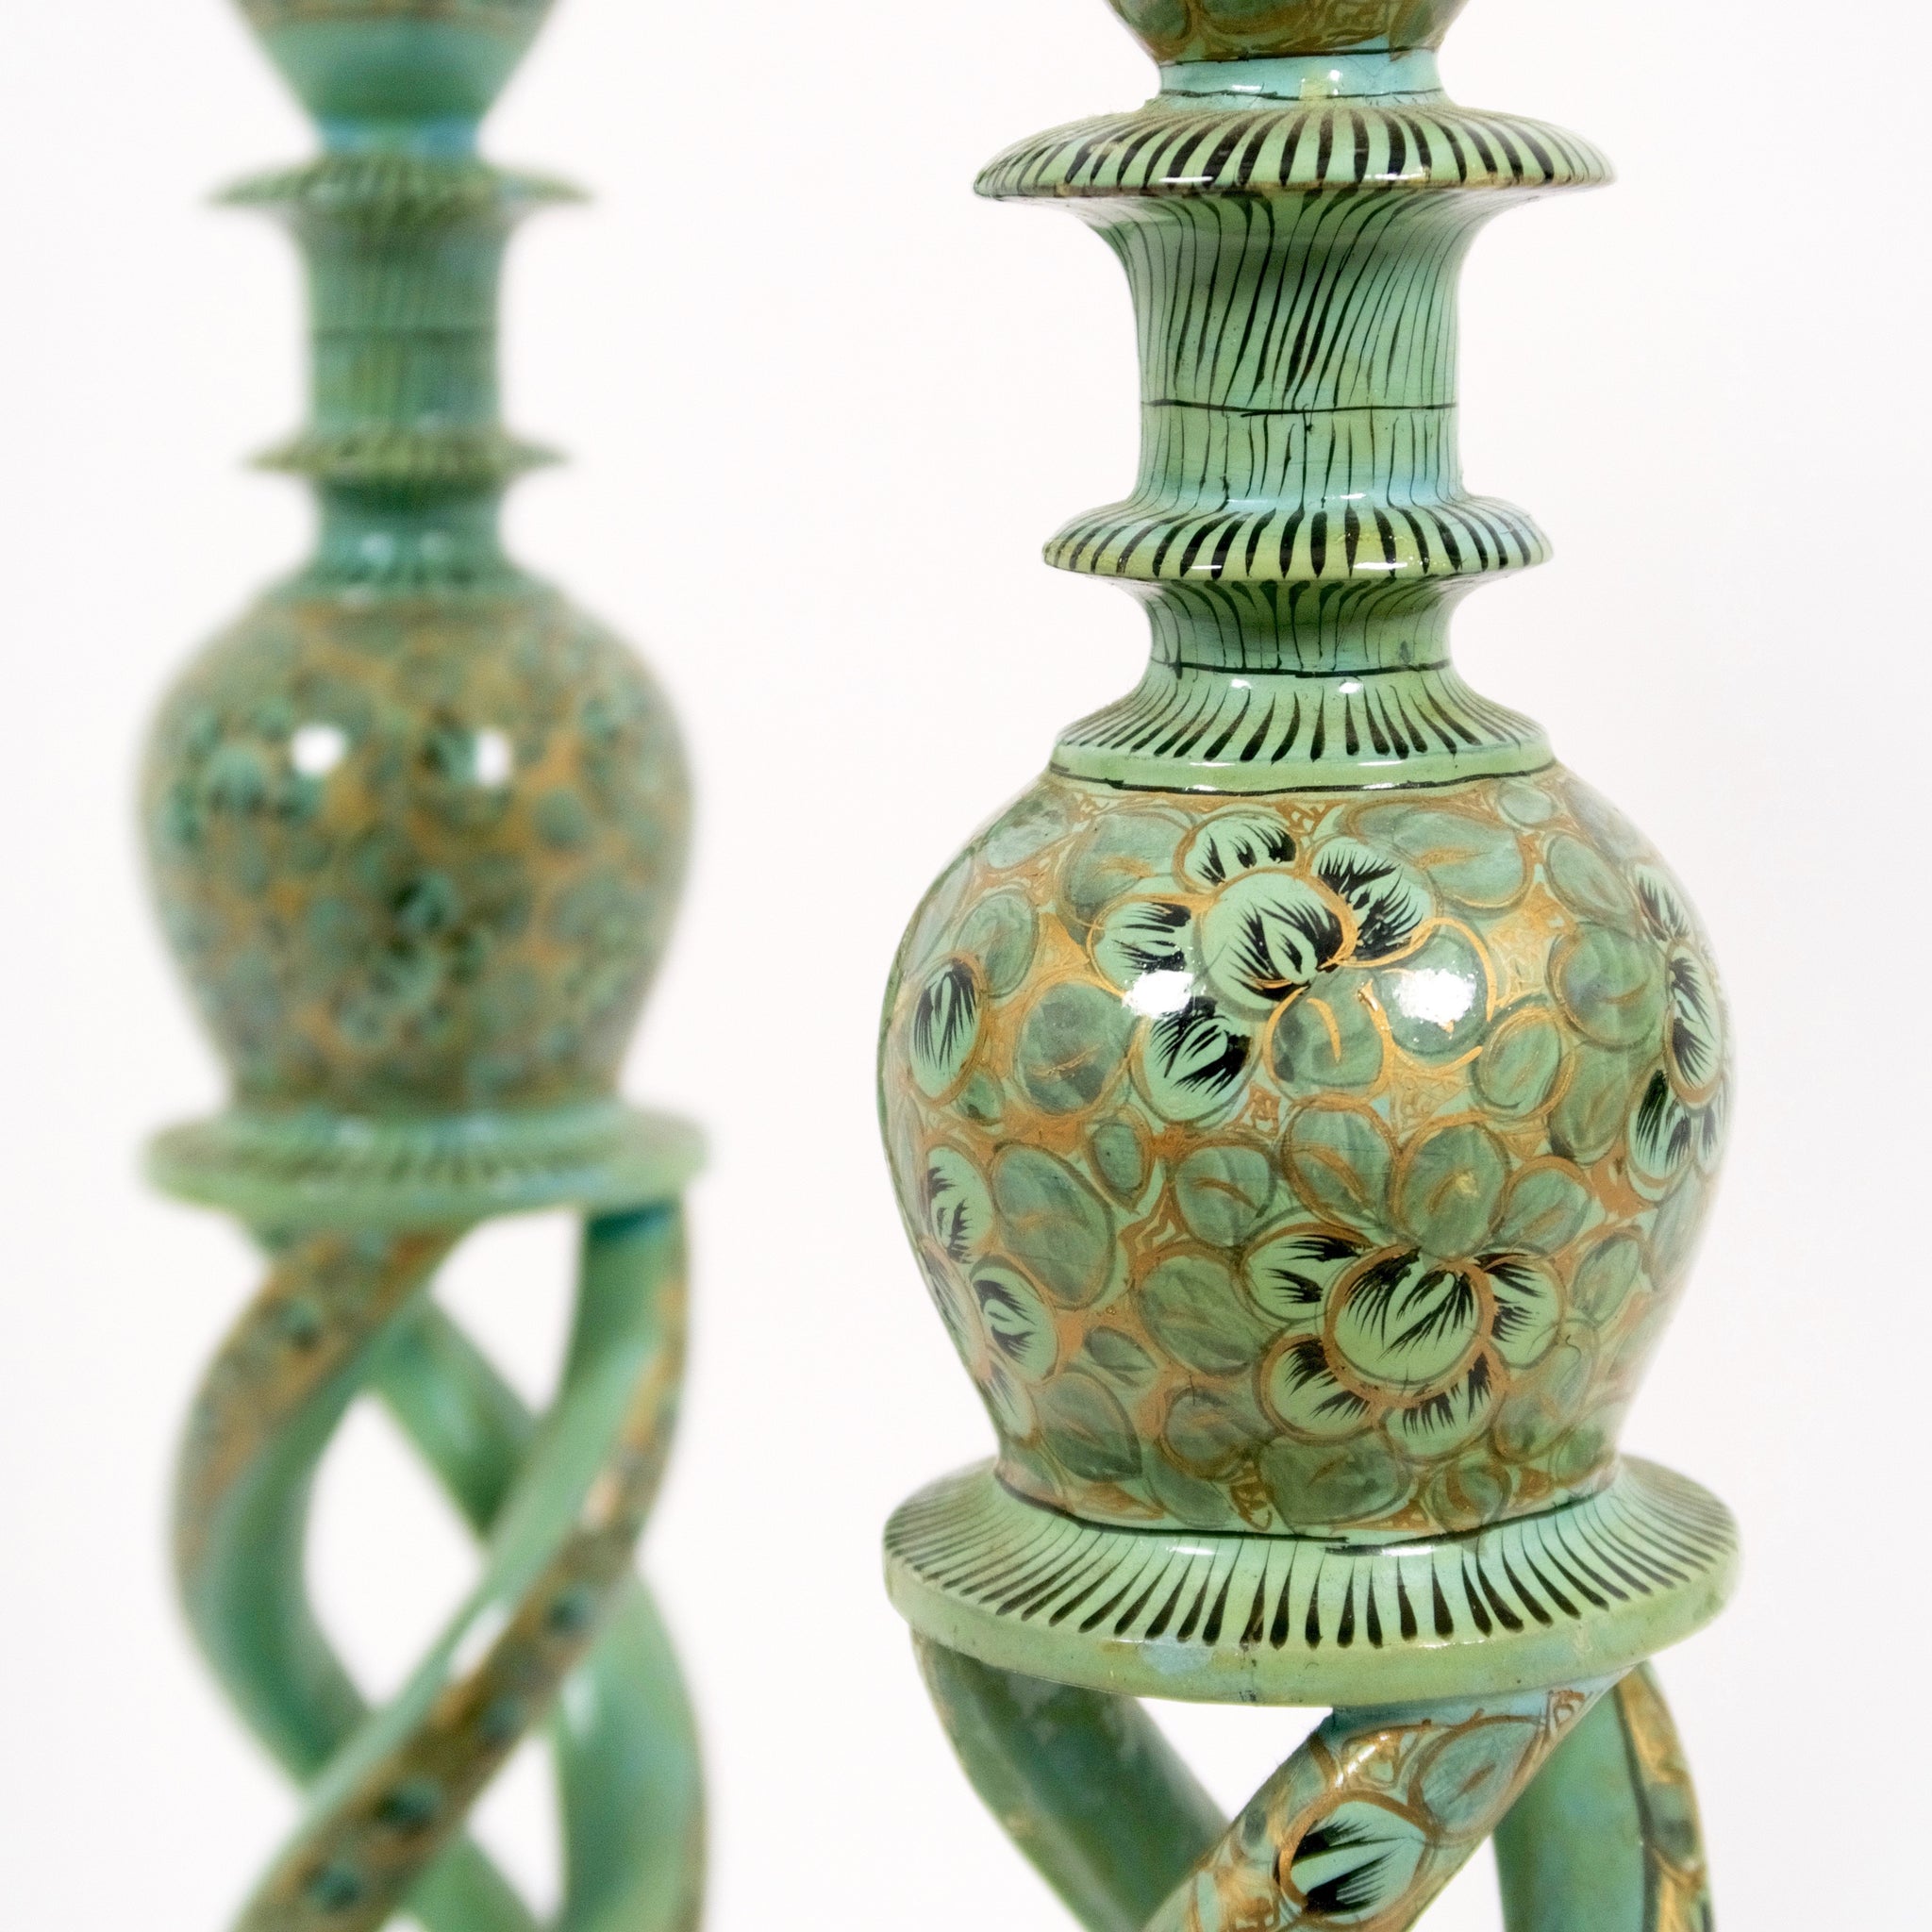 Pair of hand decorated Kashmiri candle sticks